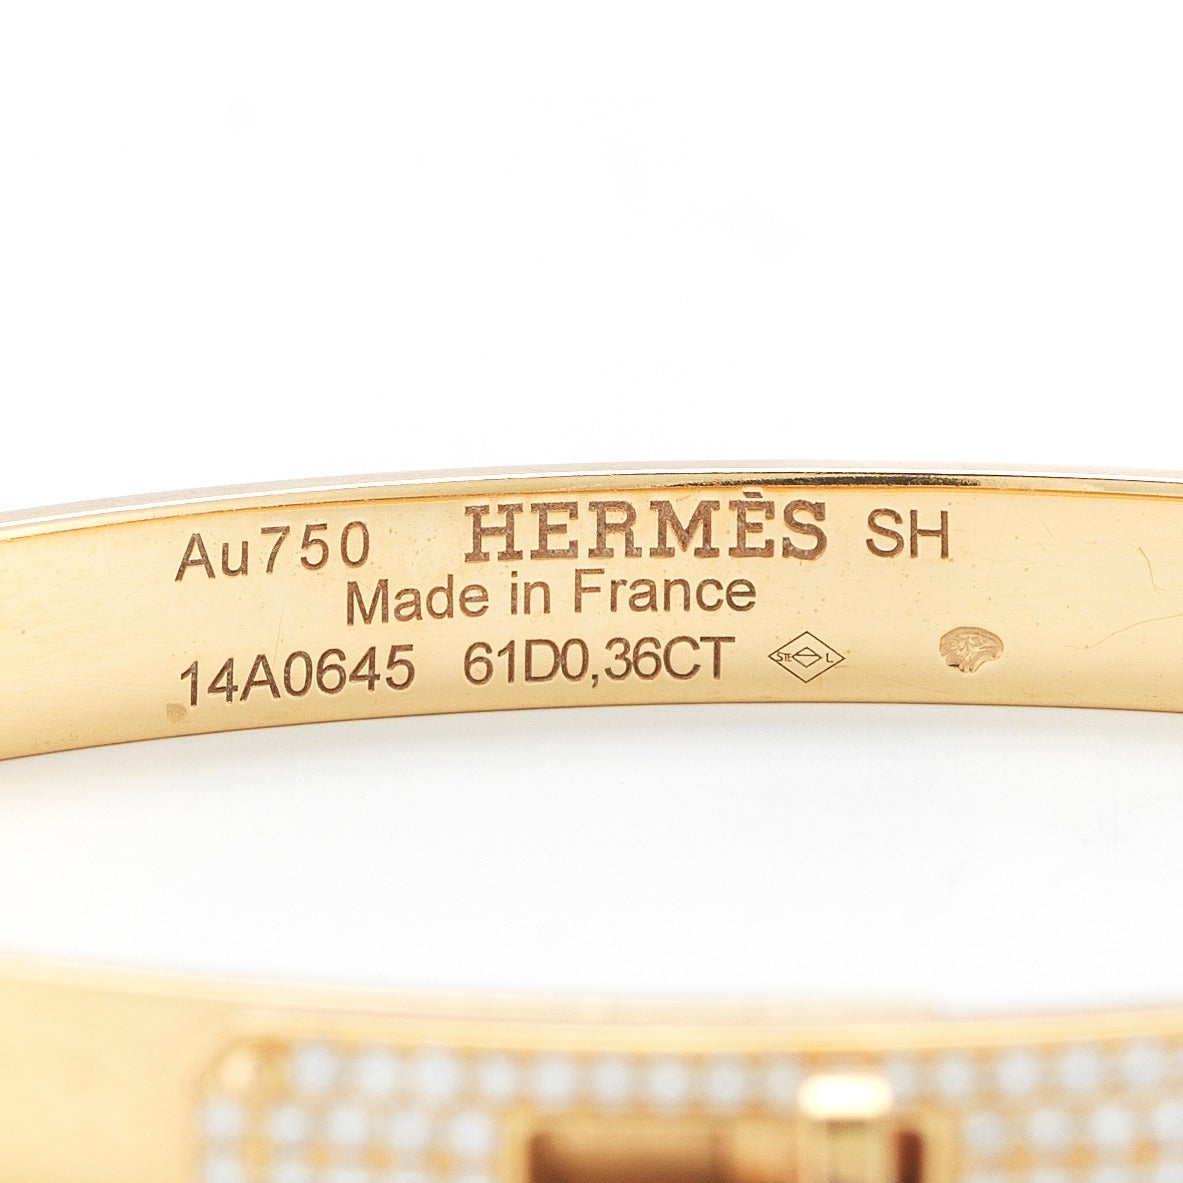 A lovely, simple, 18K yellow bangle from Hermes. The bangle has diamonds in four rows on the front, making it slightly dressier. Can be worn alone, or with other bangles.